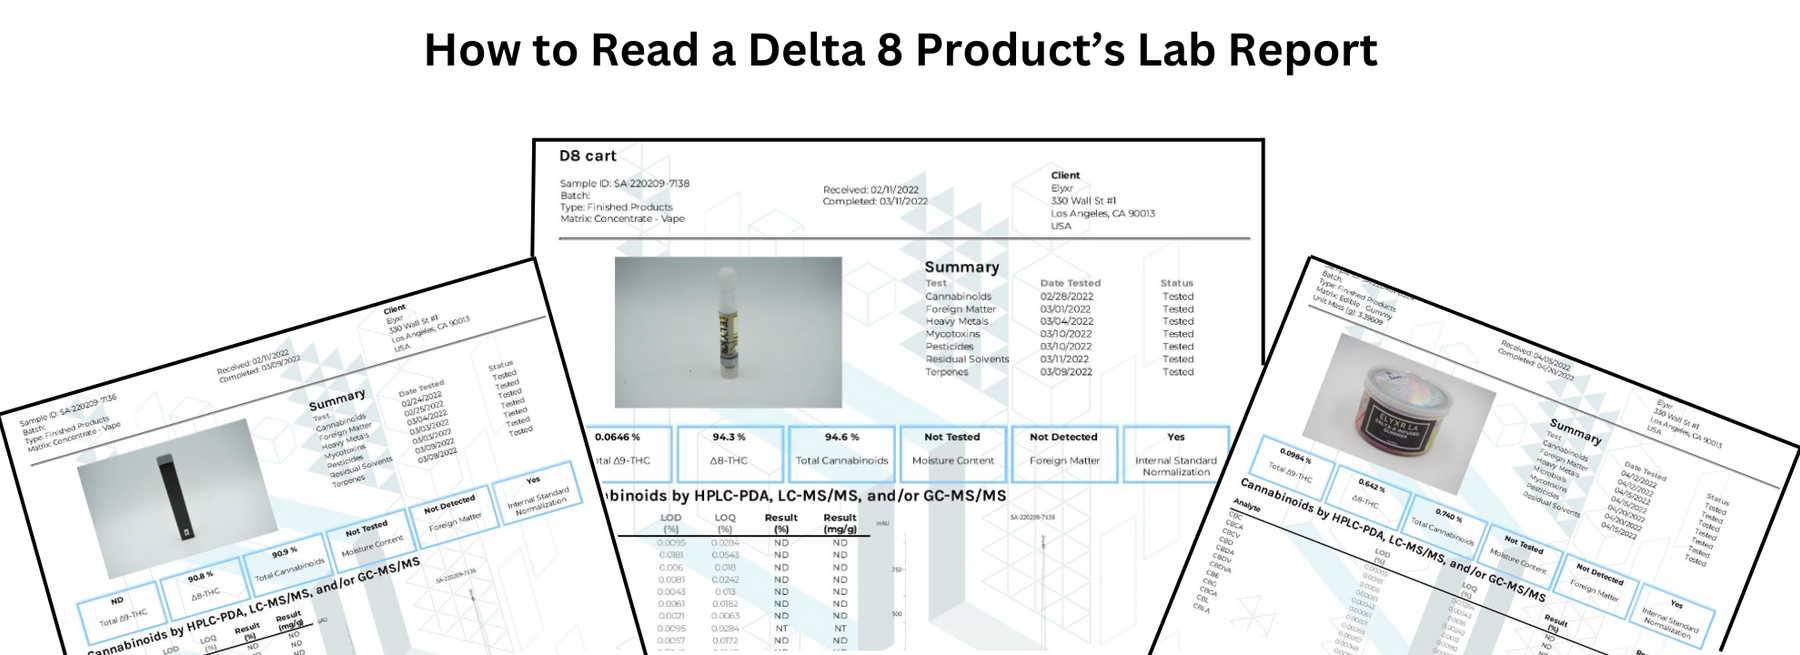 How to Read a Delta 8 Product’s Lab Report: What Should You Be Looking For?